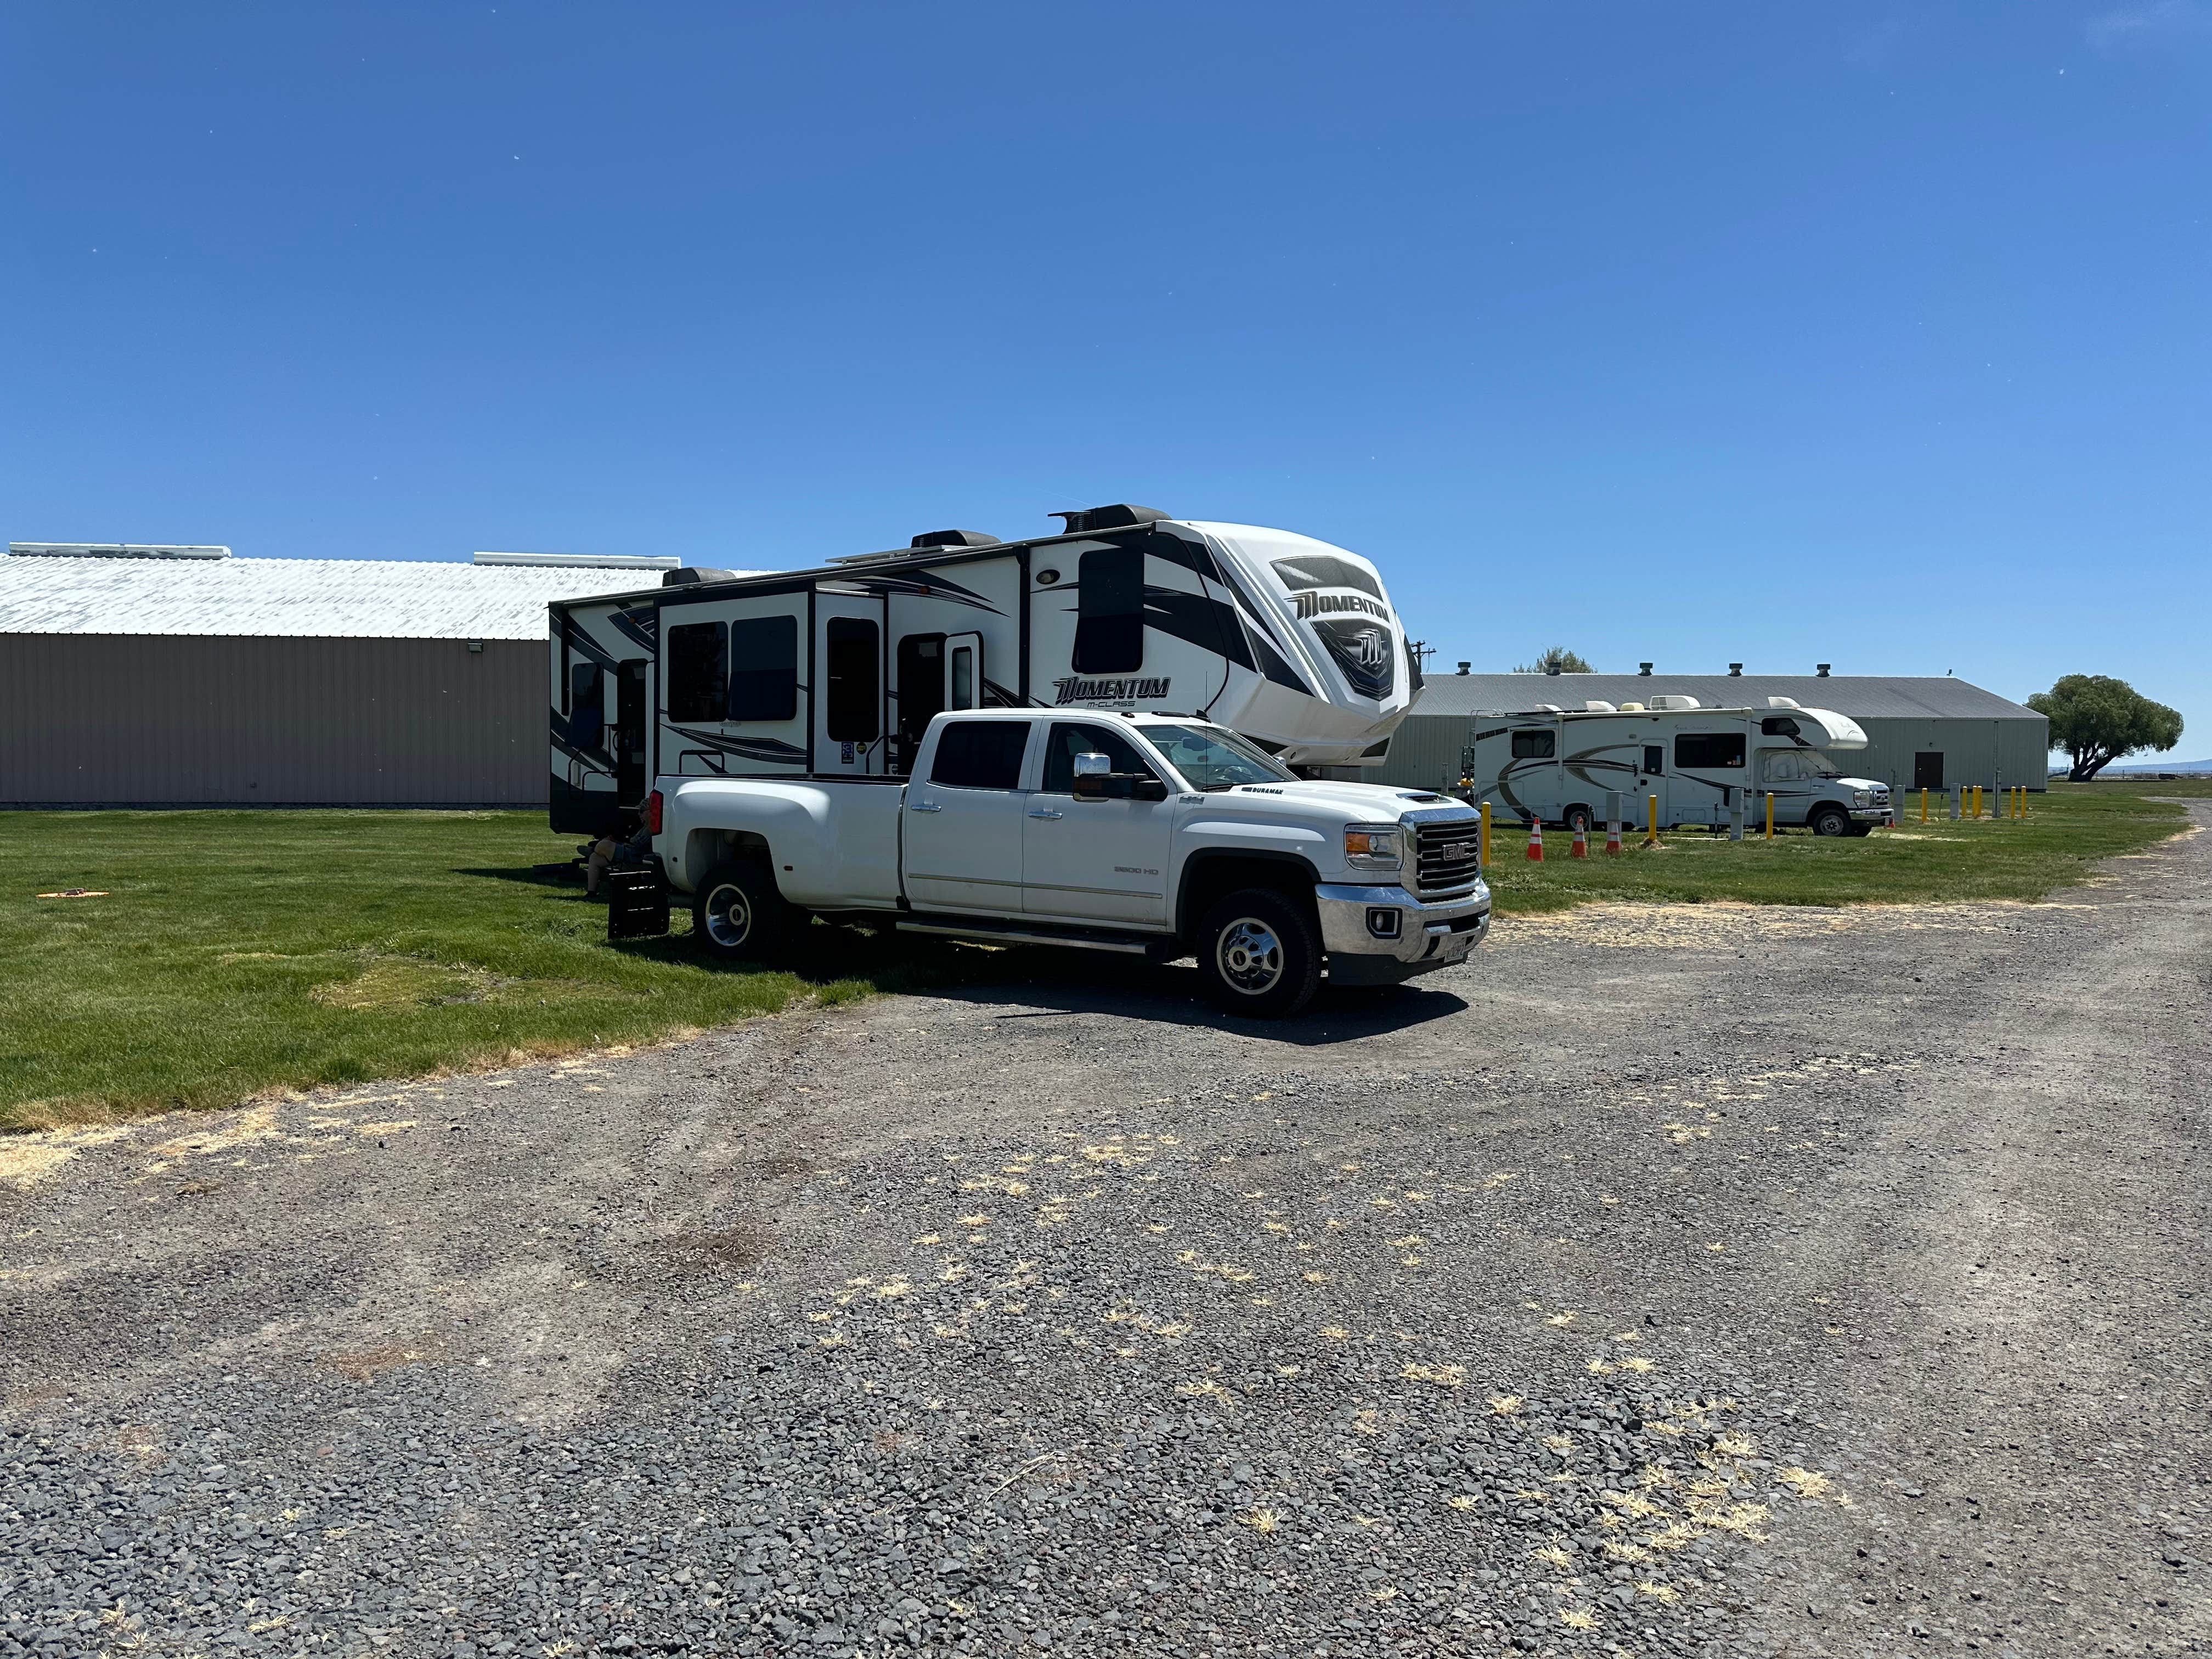 Camper submitted image from Tulelake Butte Valley Fair - 2